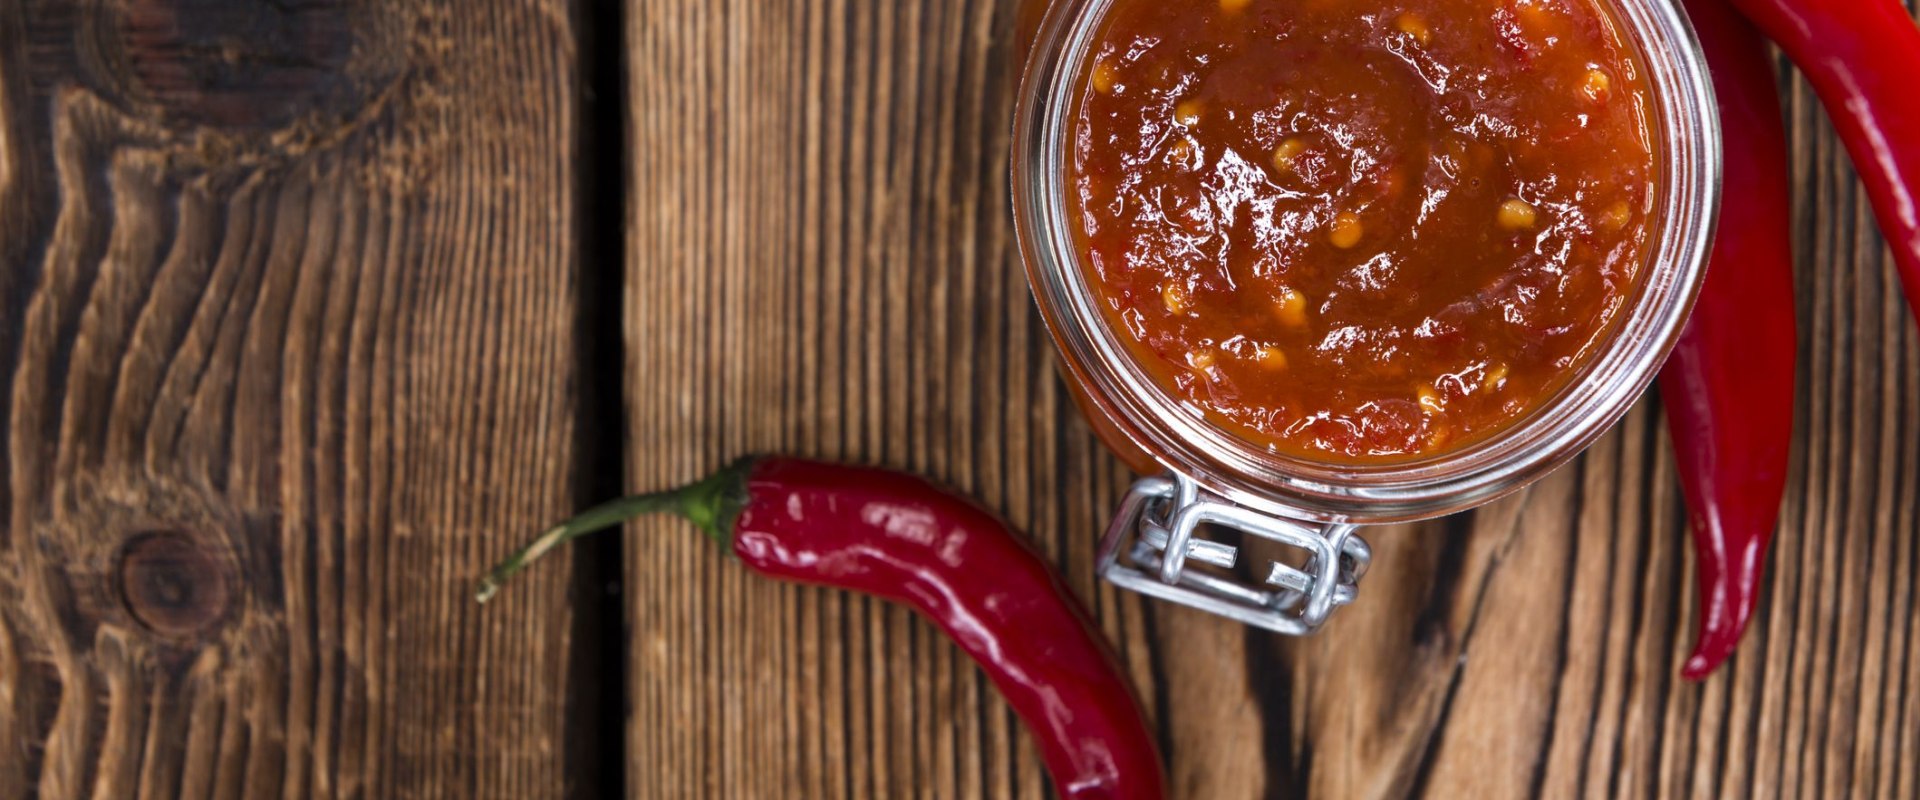 Everything You Need to Know About Sambal Oelek Chili Sauce